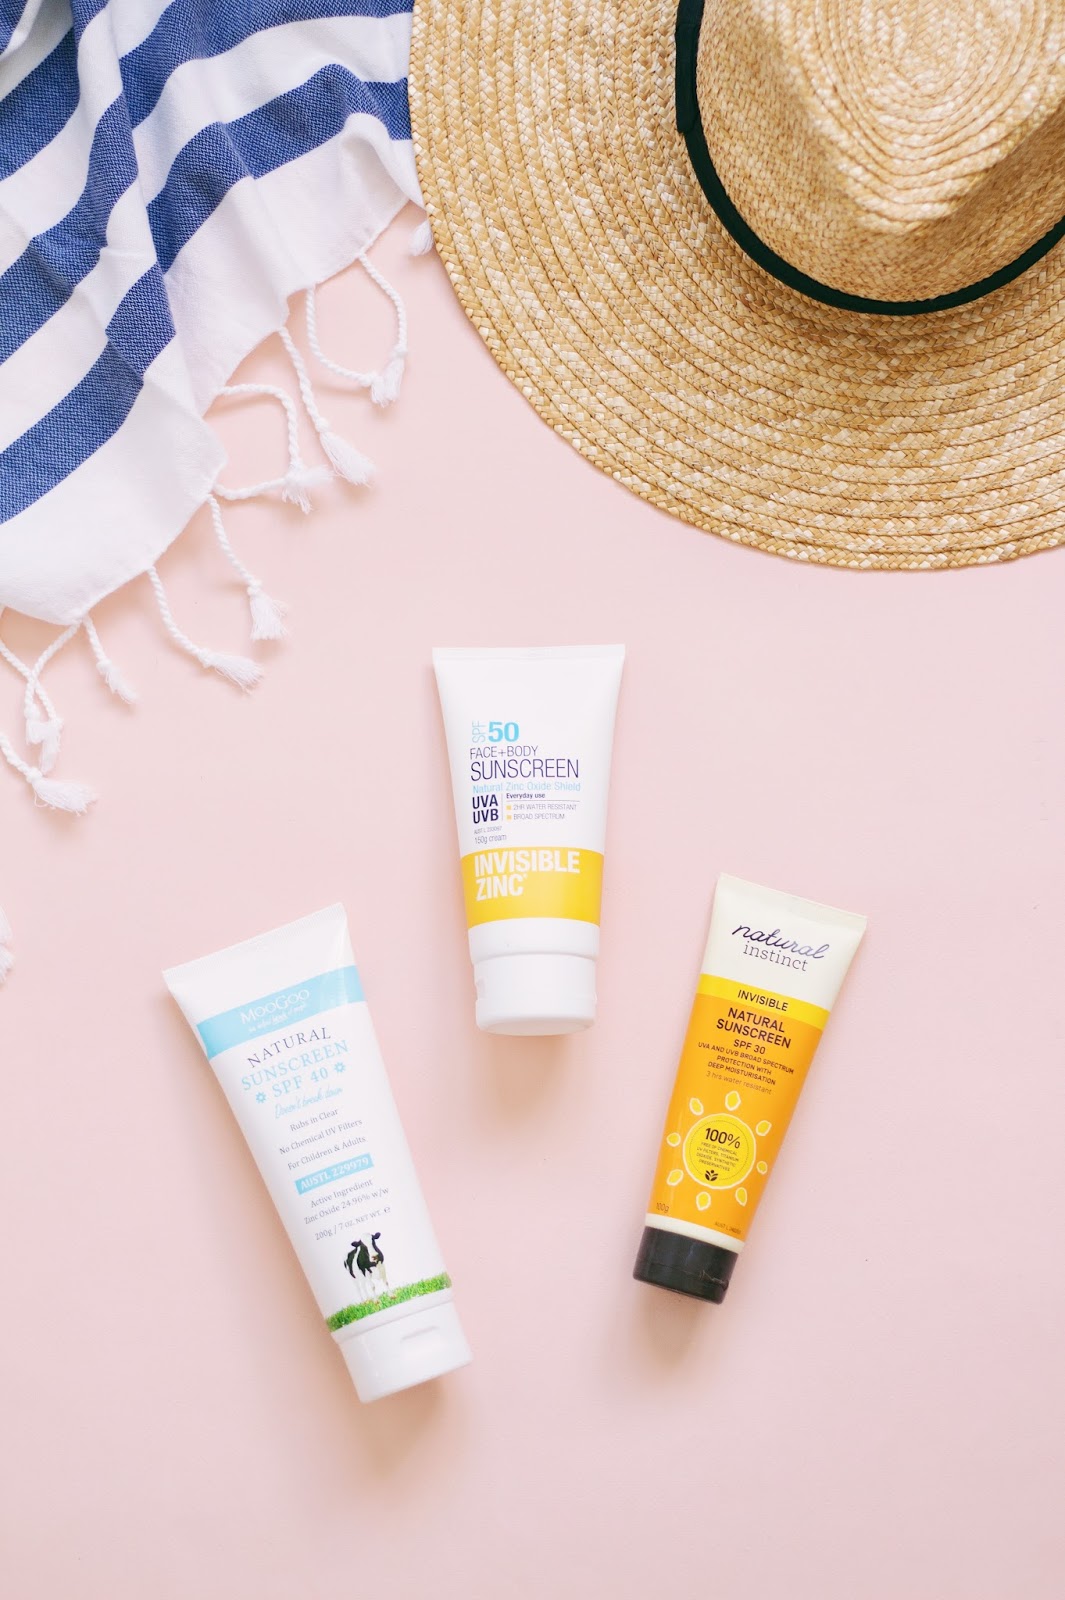 A Look at Physical Sunscreens